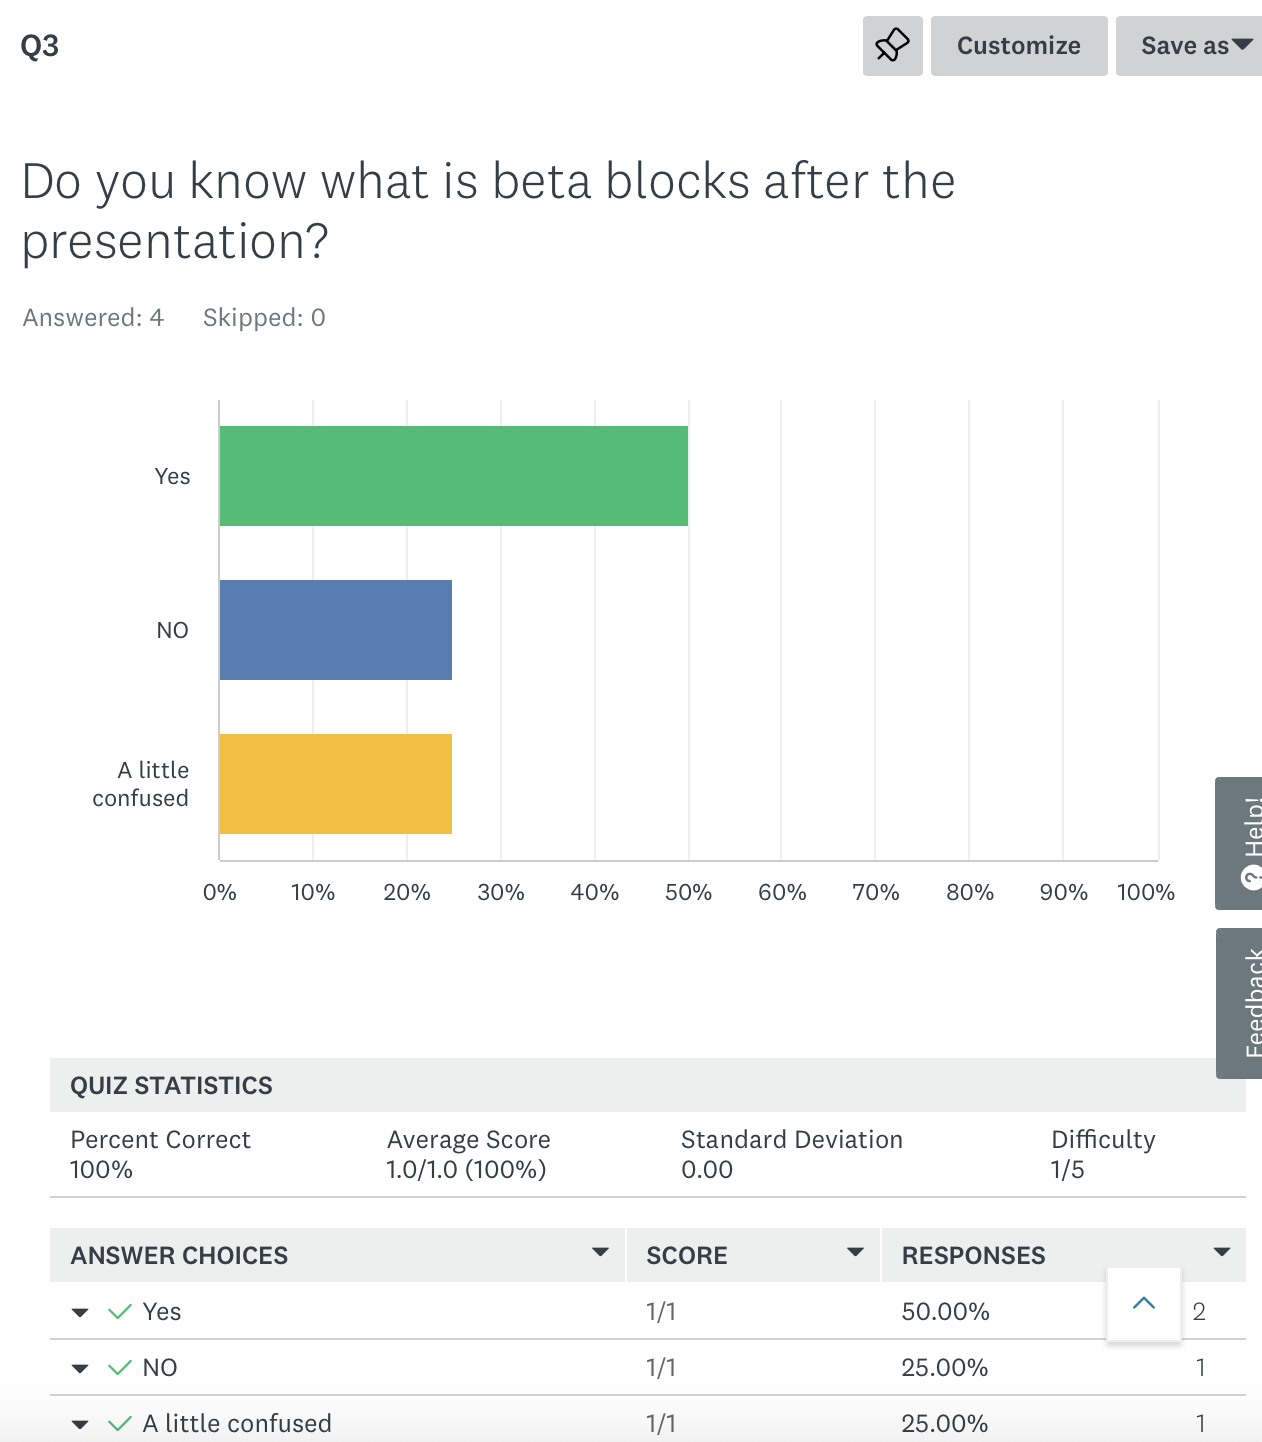 Do you know what is beta blocks after the presentation